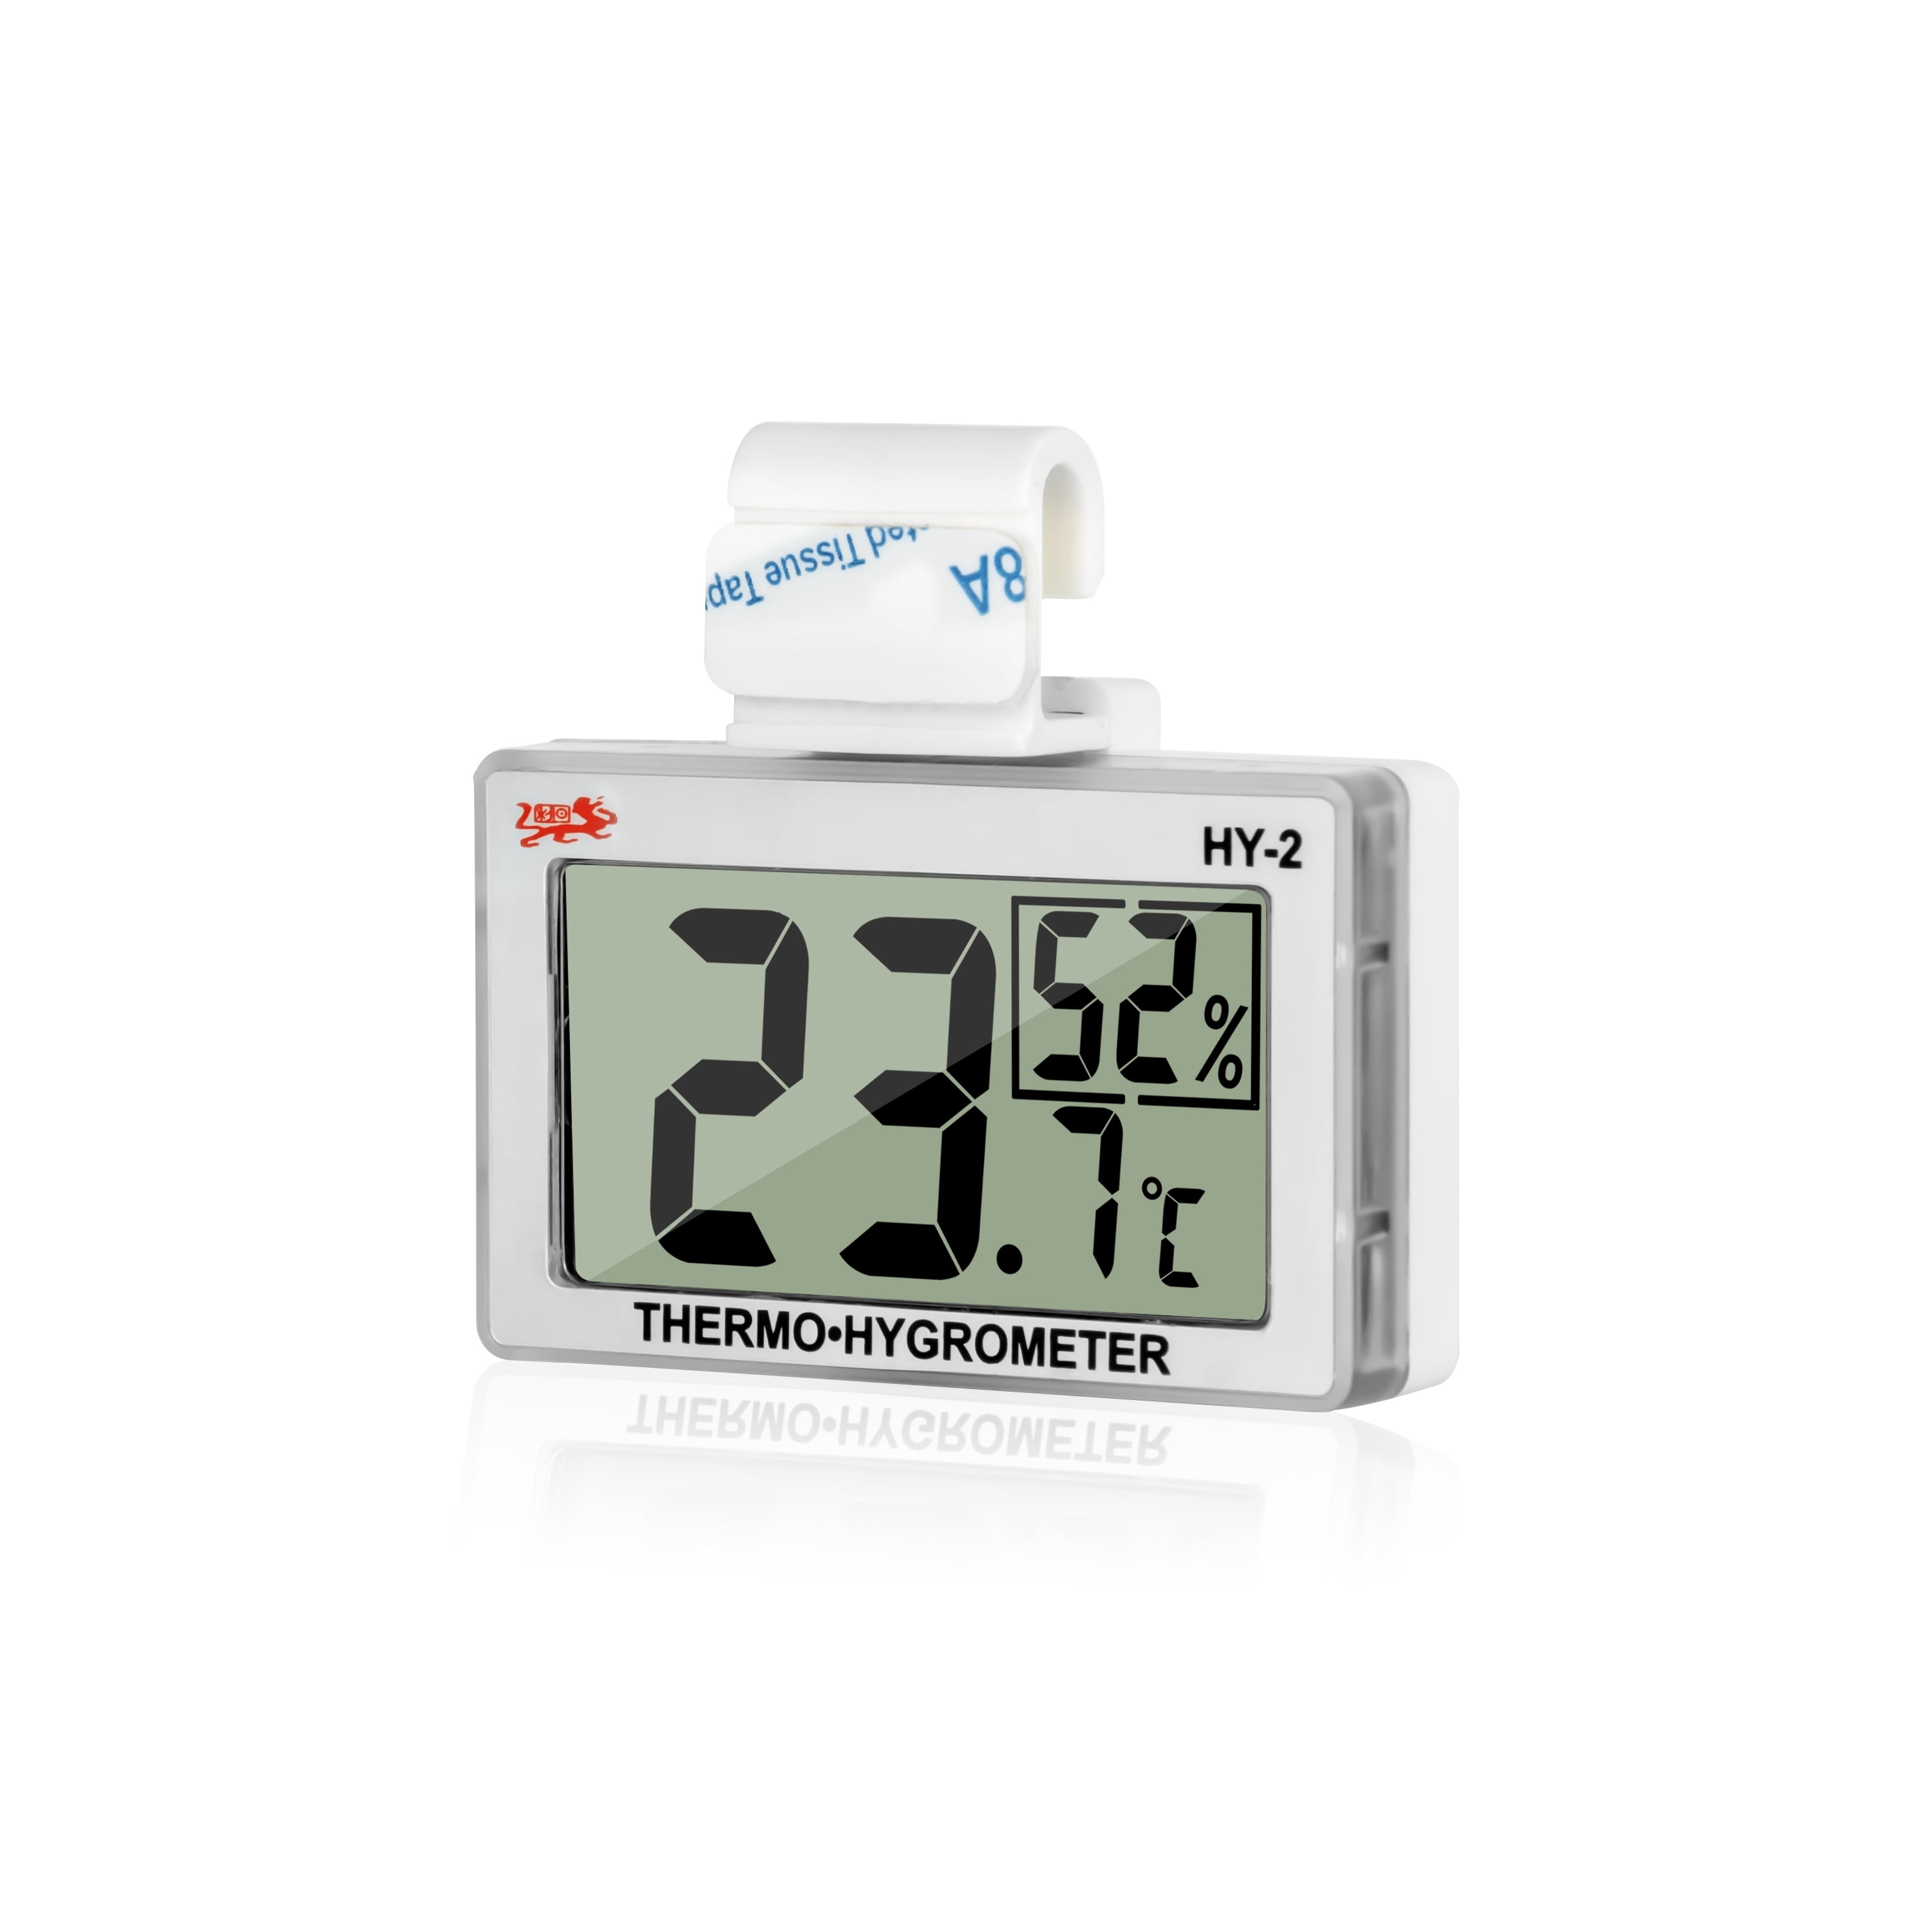 VE Temp and Humidity Gauge: Reptile Basics